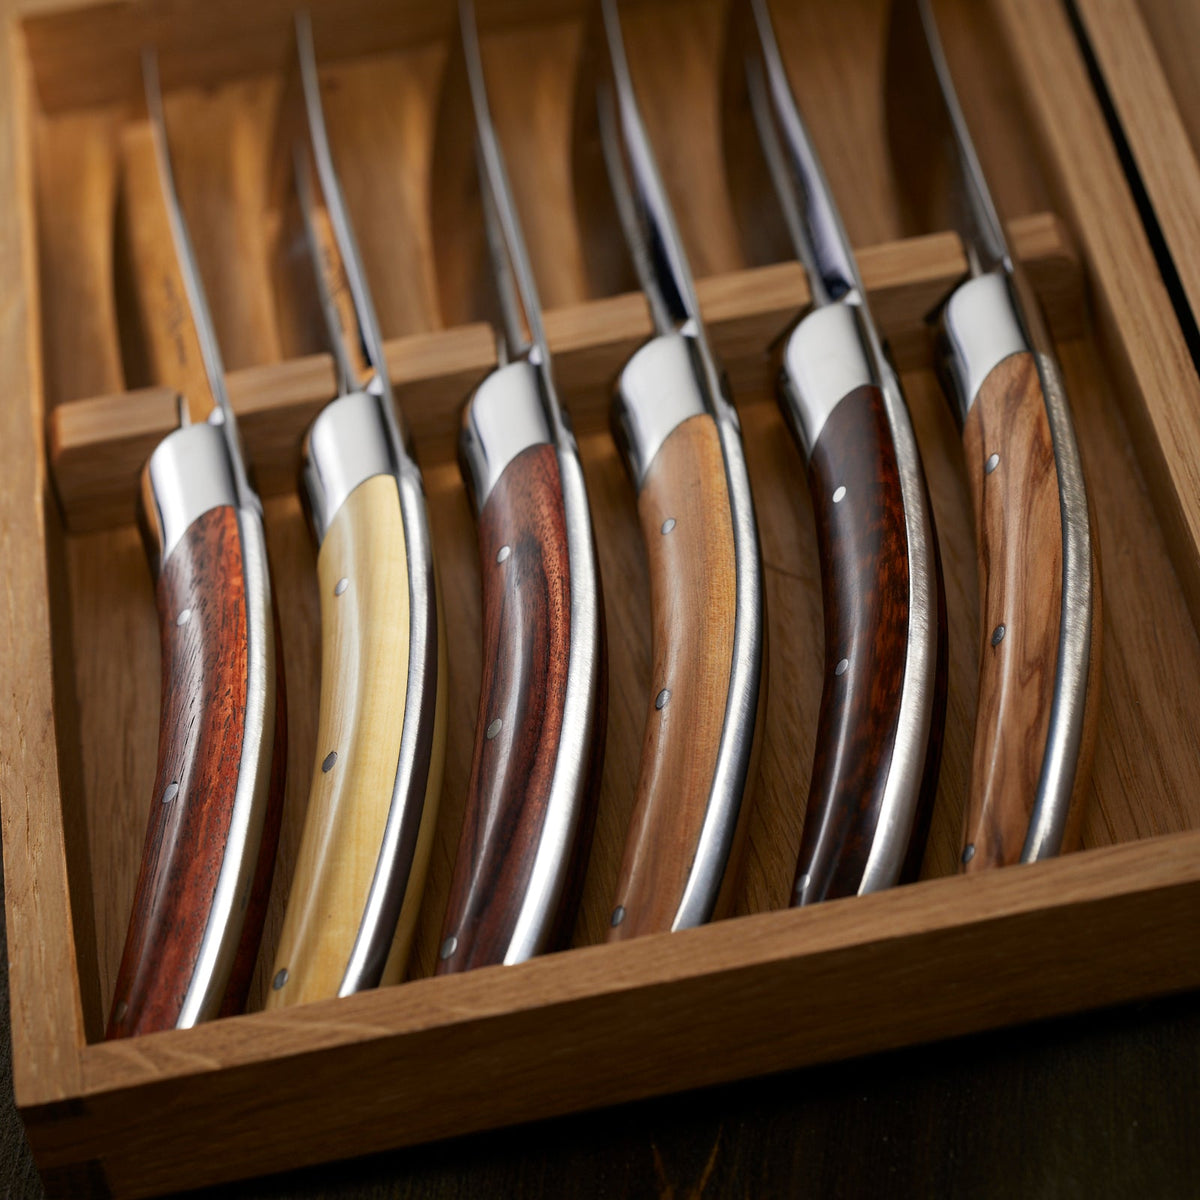 A set of Goyon-Chazeau Styl&#39;ver Mixed Wood Steak Knives Boxed Set/6 in a wooden box.